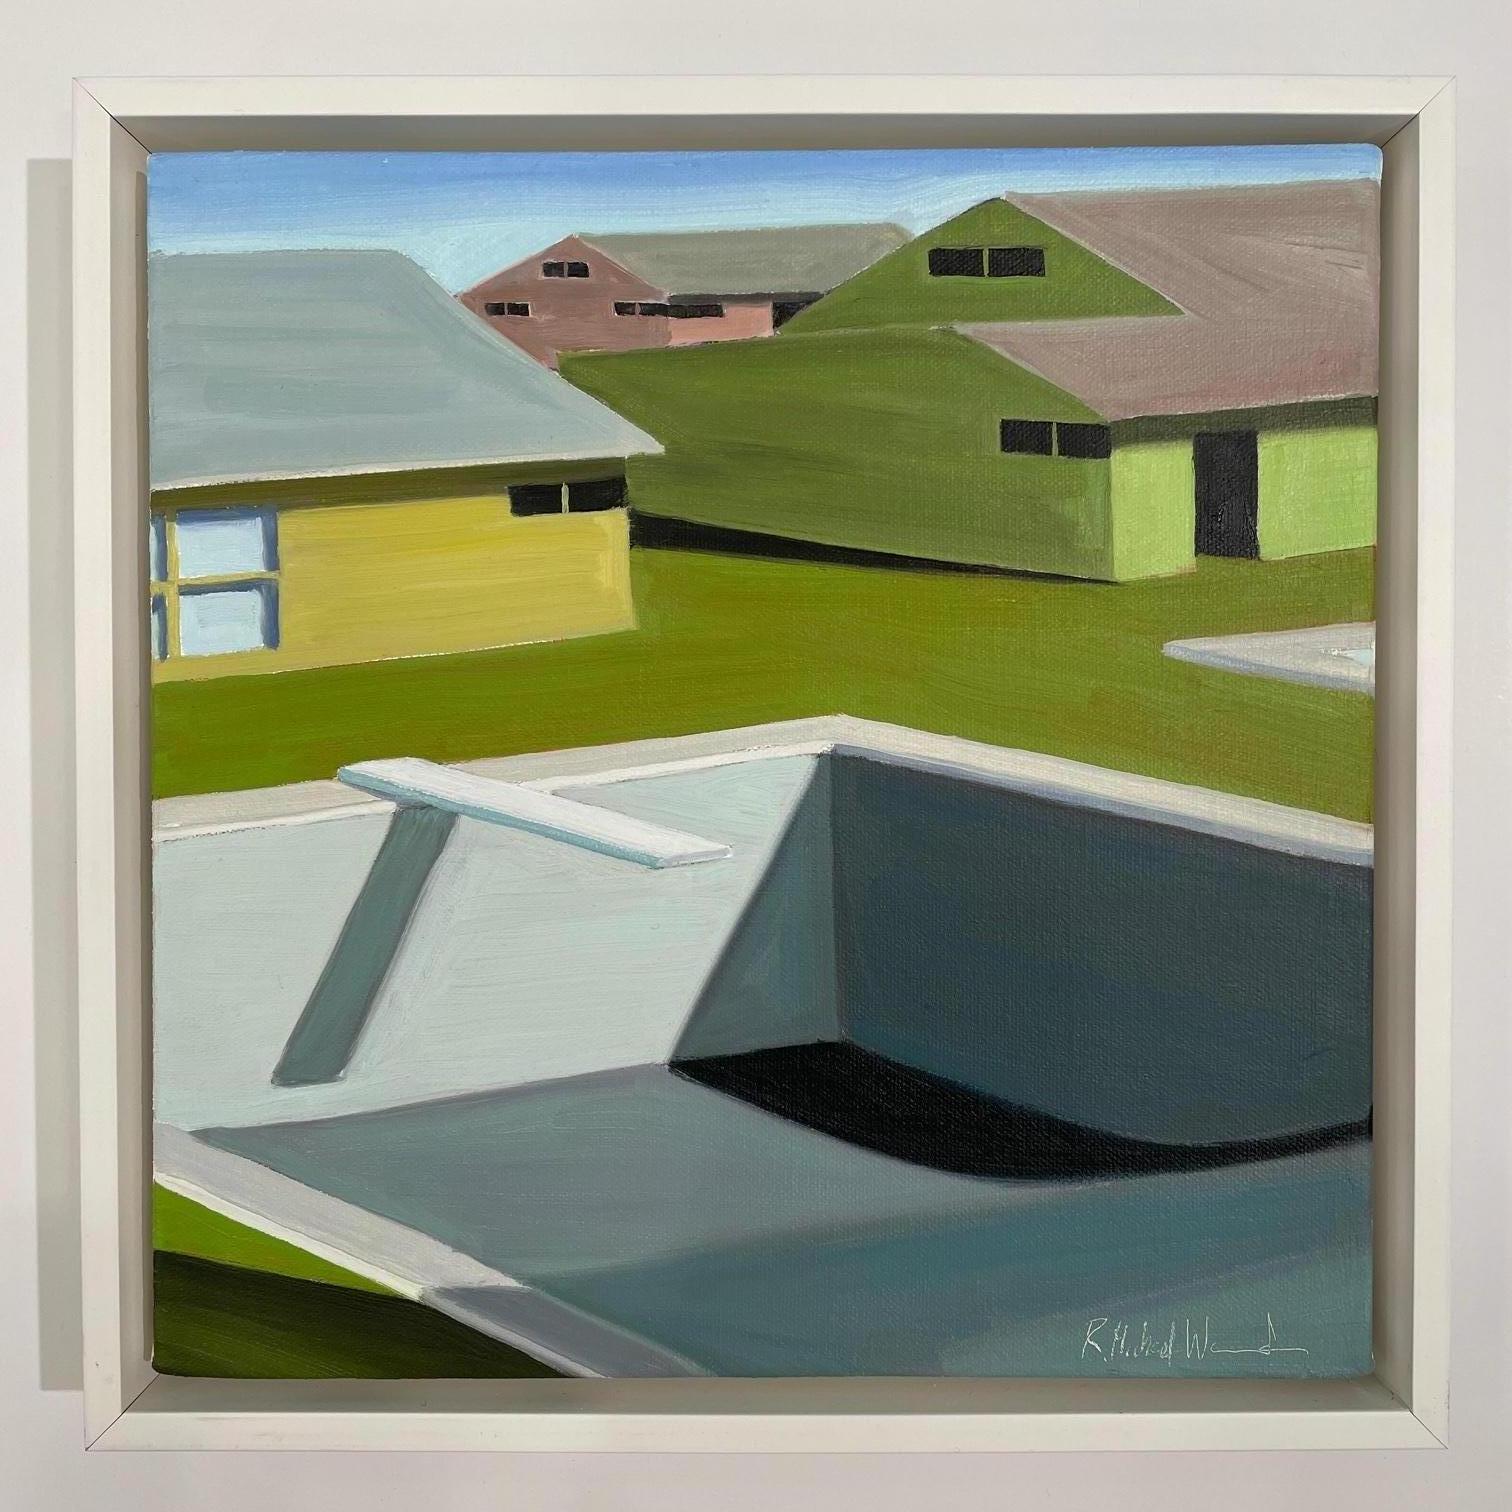 R. Michael Wommack is known for his signature style of painting. His subject matter often shows Mid-Century room interiors with garden pools visible through the windows. Recently his works include beach houses and ocean scenes. The frame size of the